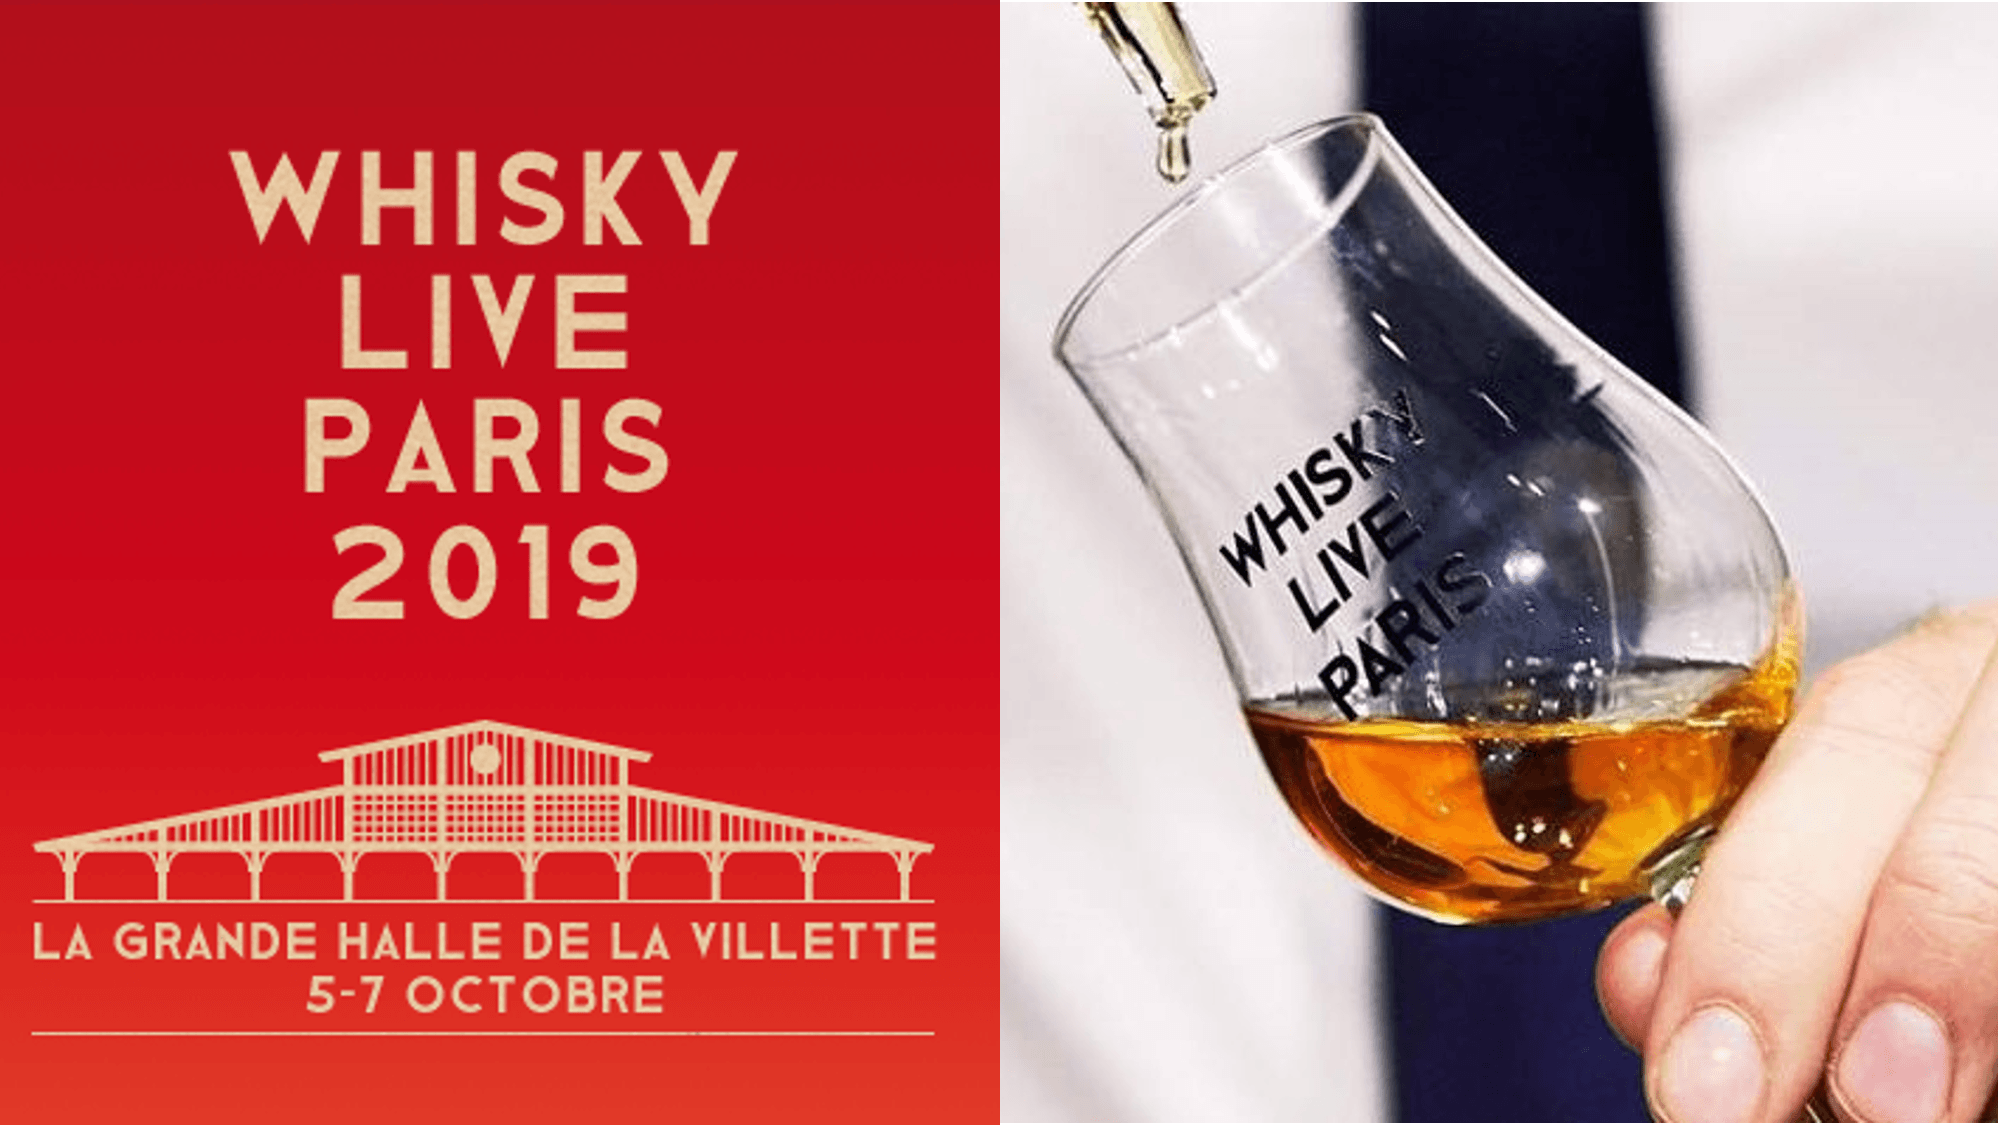 Whisky Live Paris 2019 – One of the greatest whisky show!